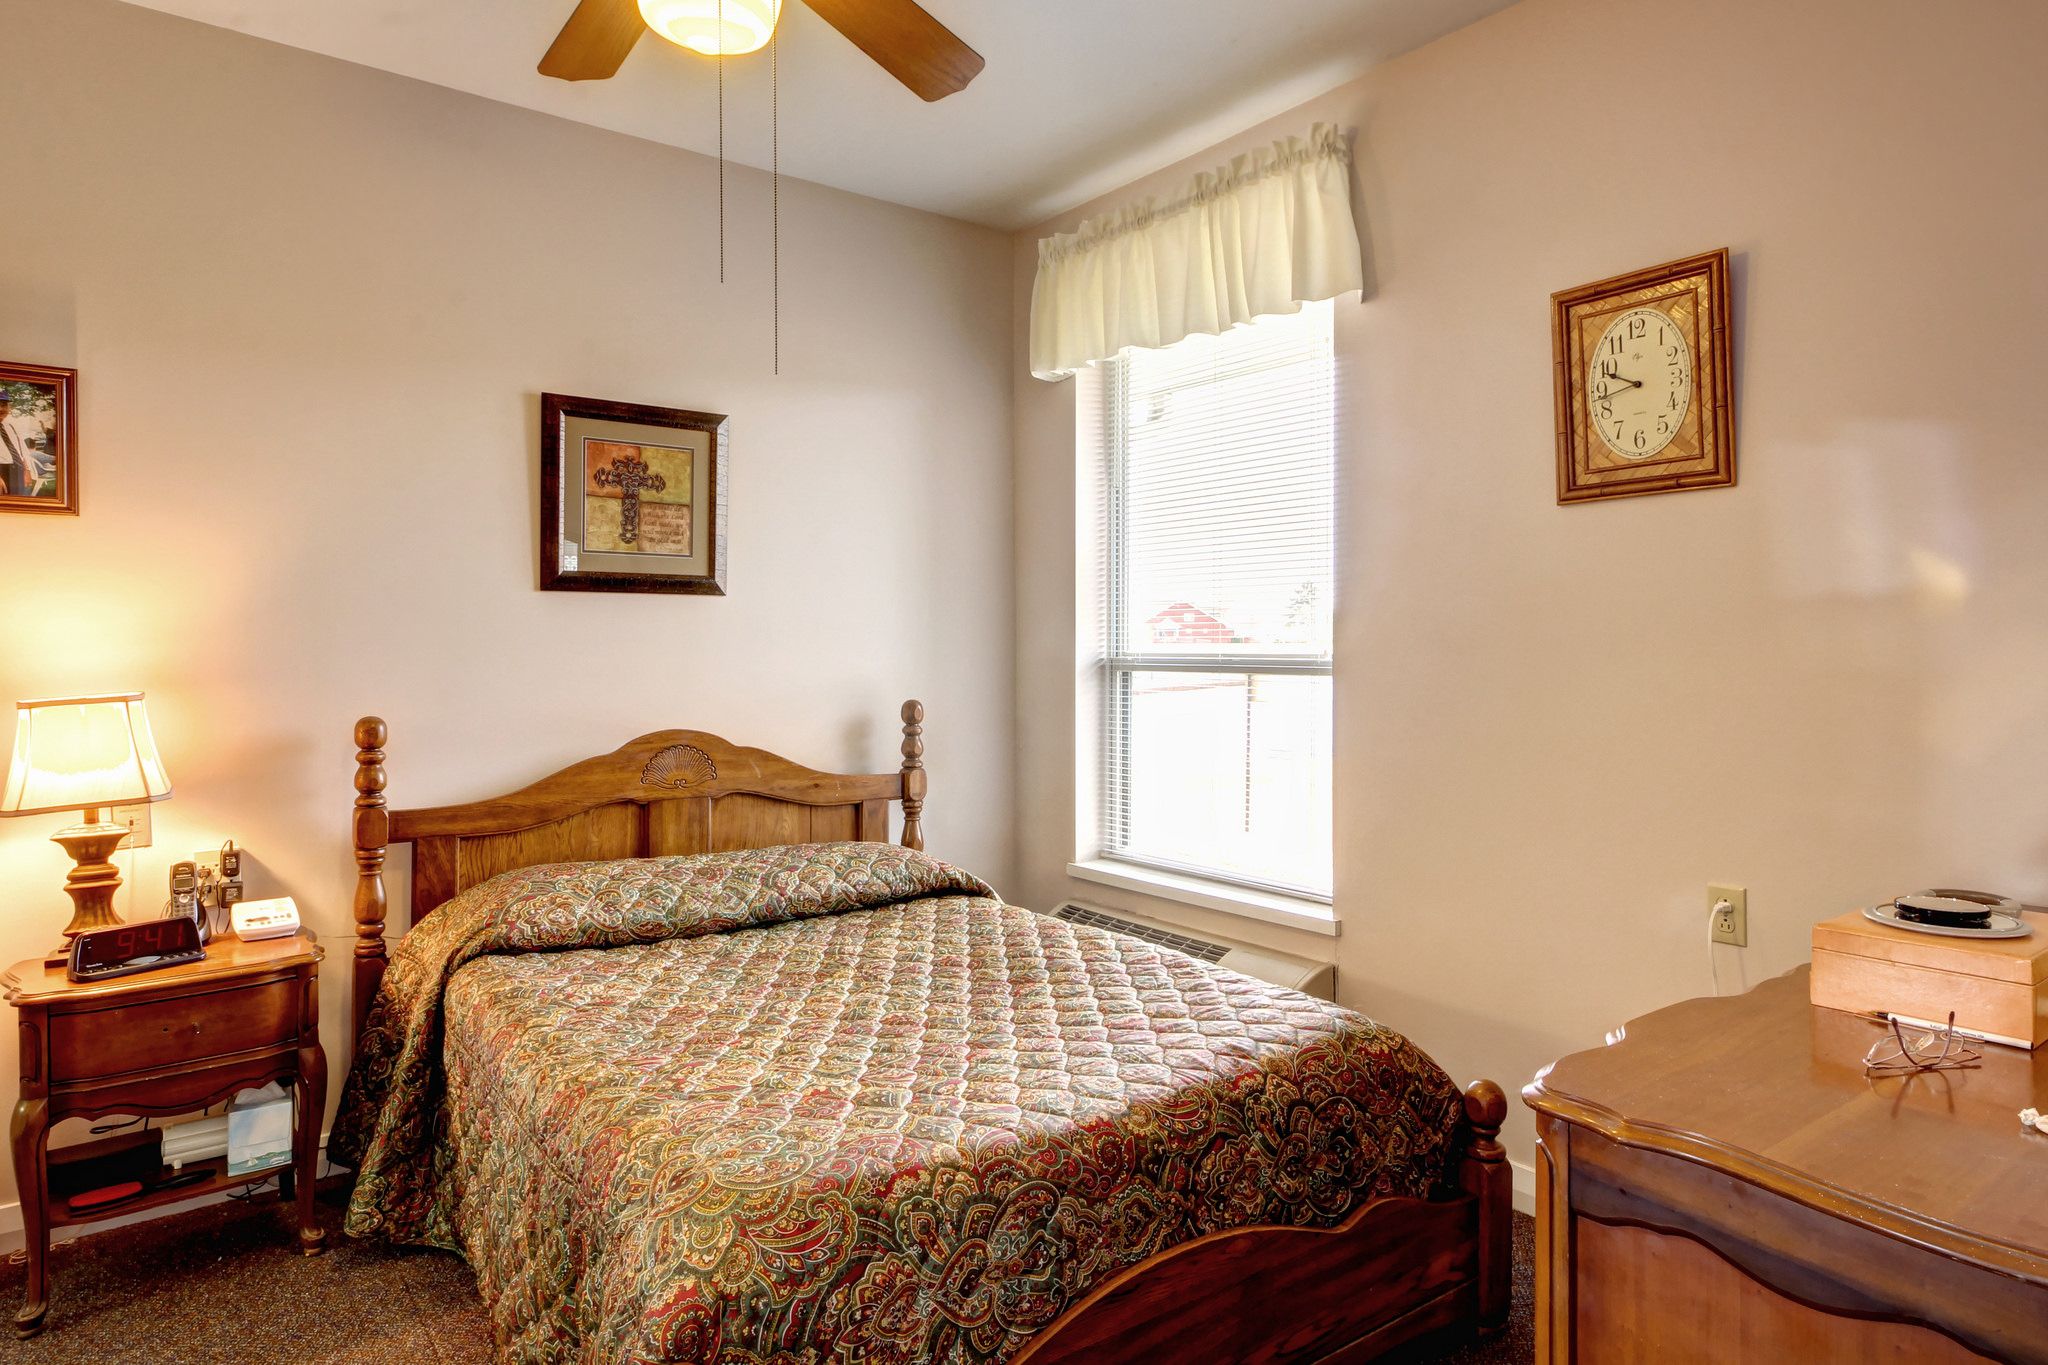 Interior design of a bedroom in Branchwater Village Senior Living with bed, furniture, and home decor.